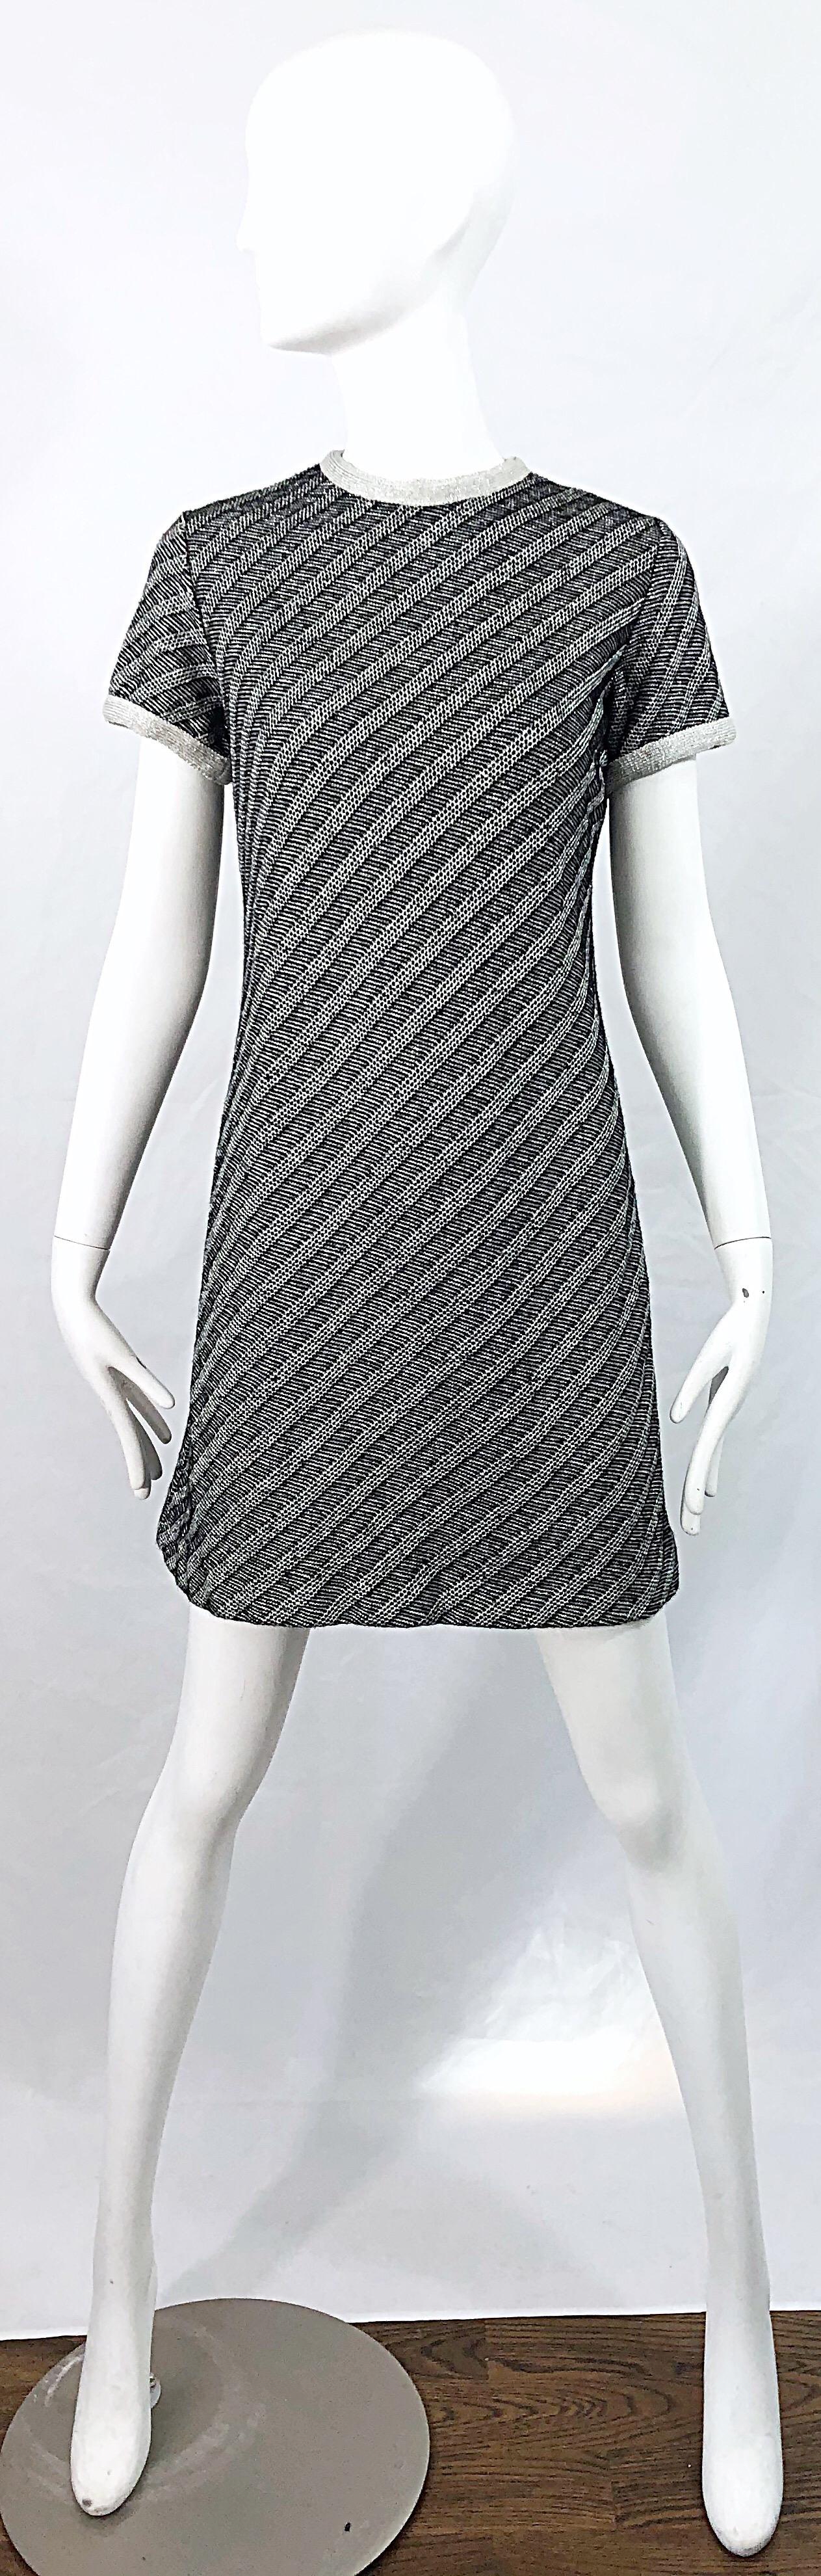 Chic 1960s Black and Silver Metallic Knit Vintage Striped 60s Shift Dress For Sale 7